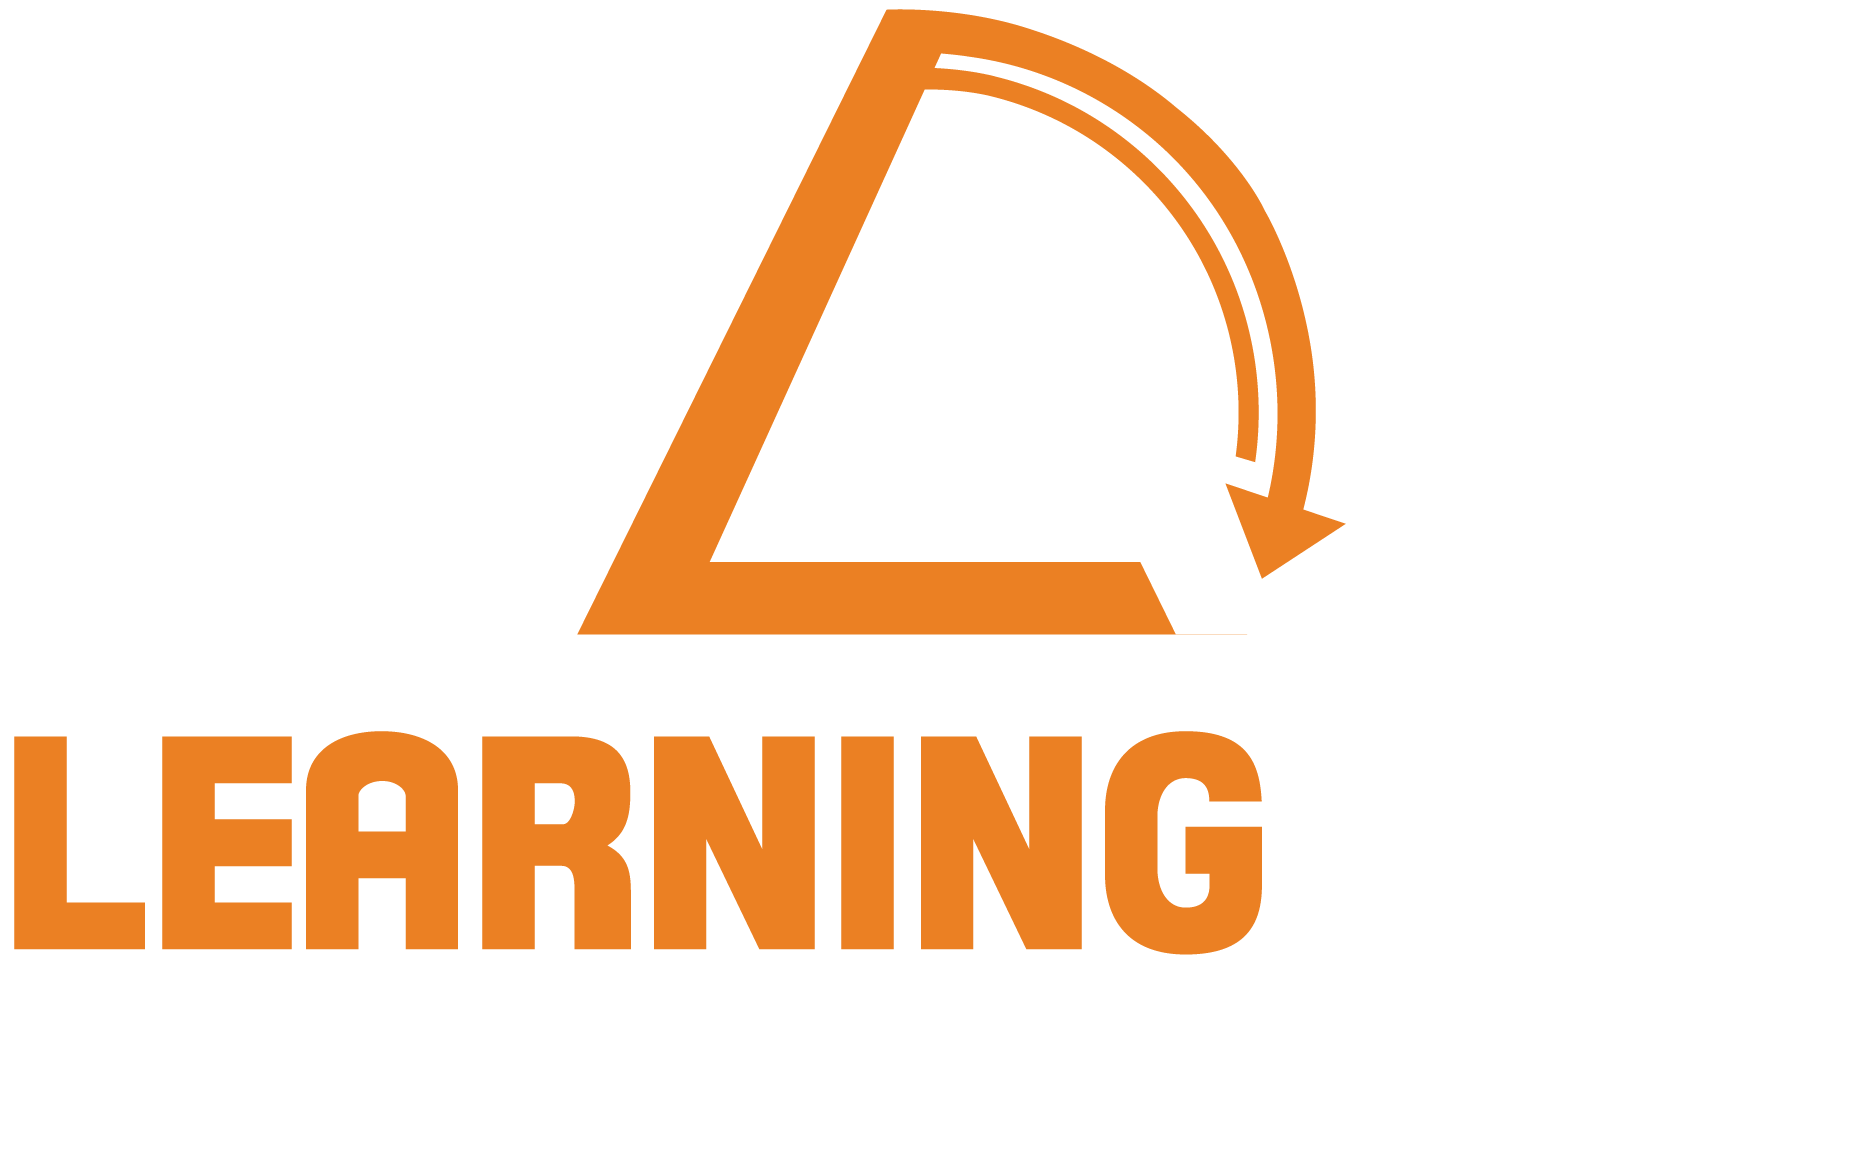 Learning360 Academy